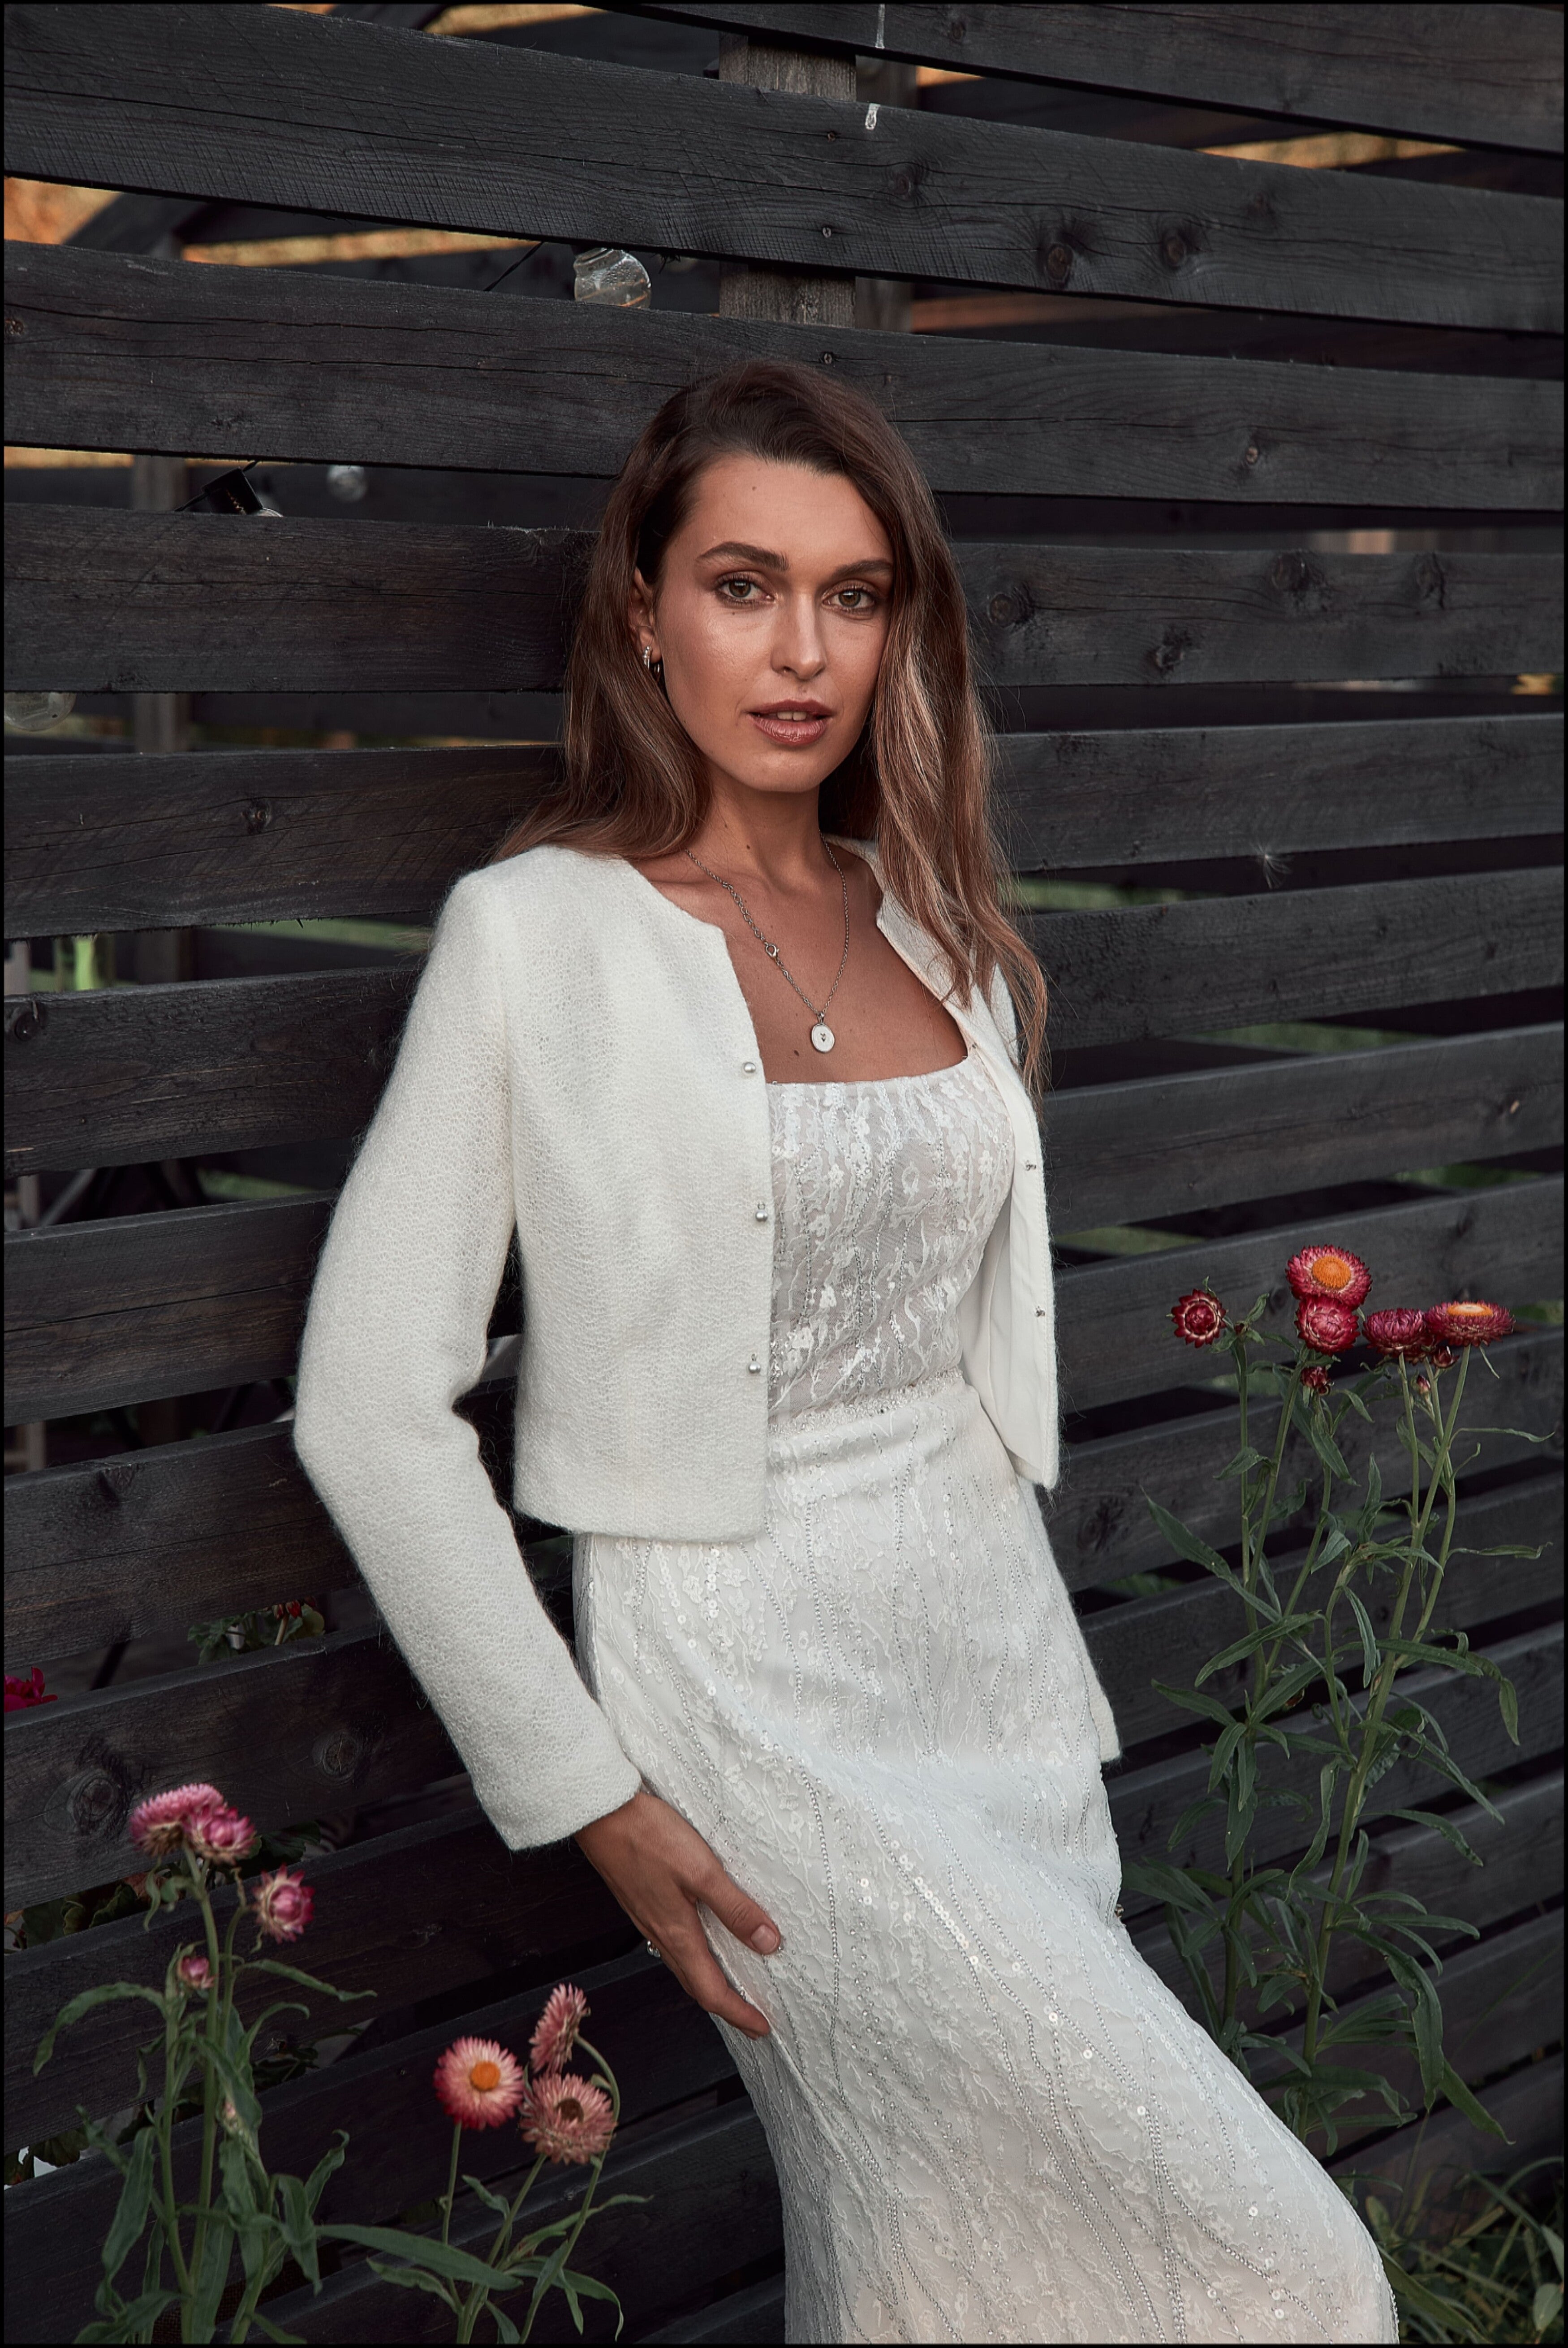 Mohair knitted bridal jacket with pearl buttons.